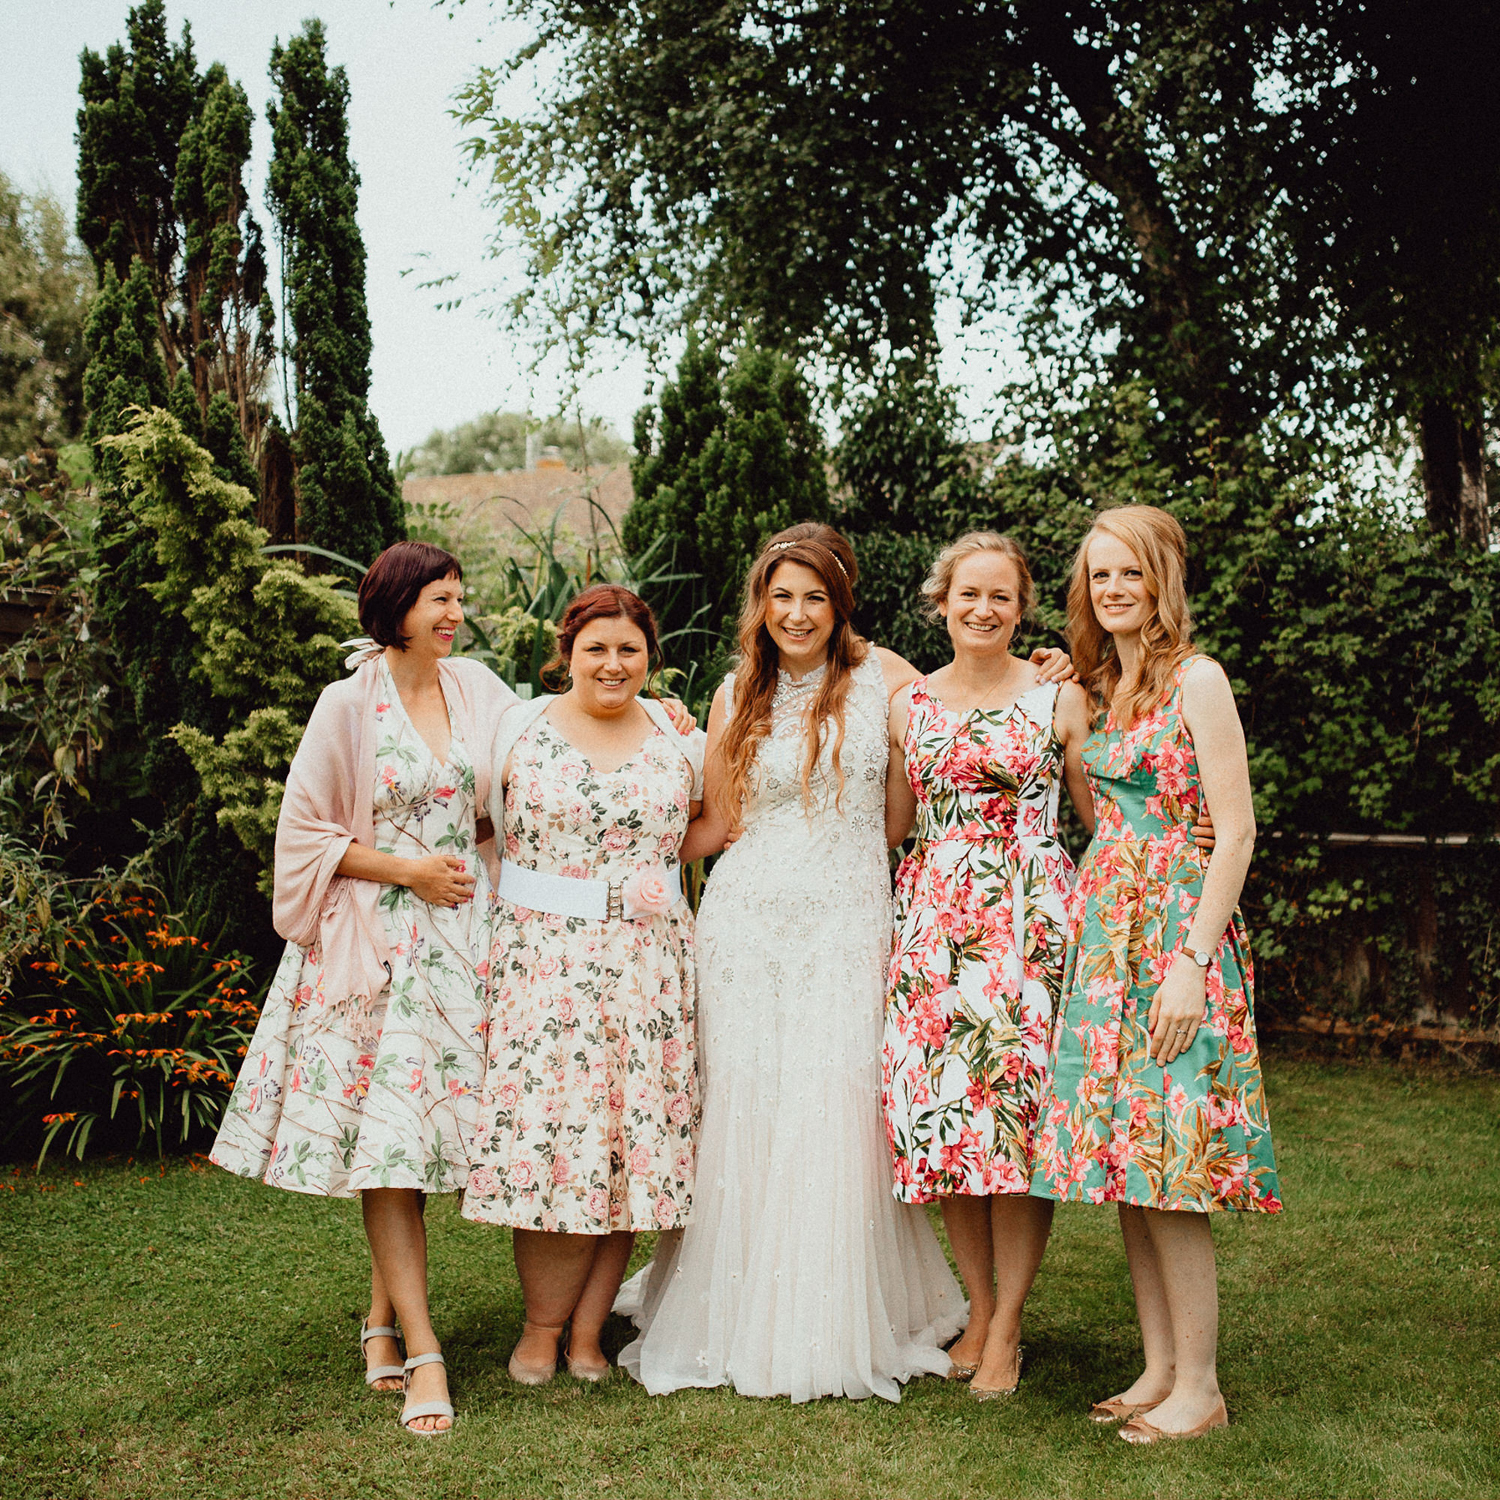 12 Bridesmaids in floral 1950s inspired dresses